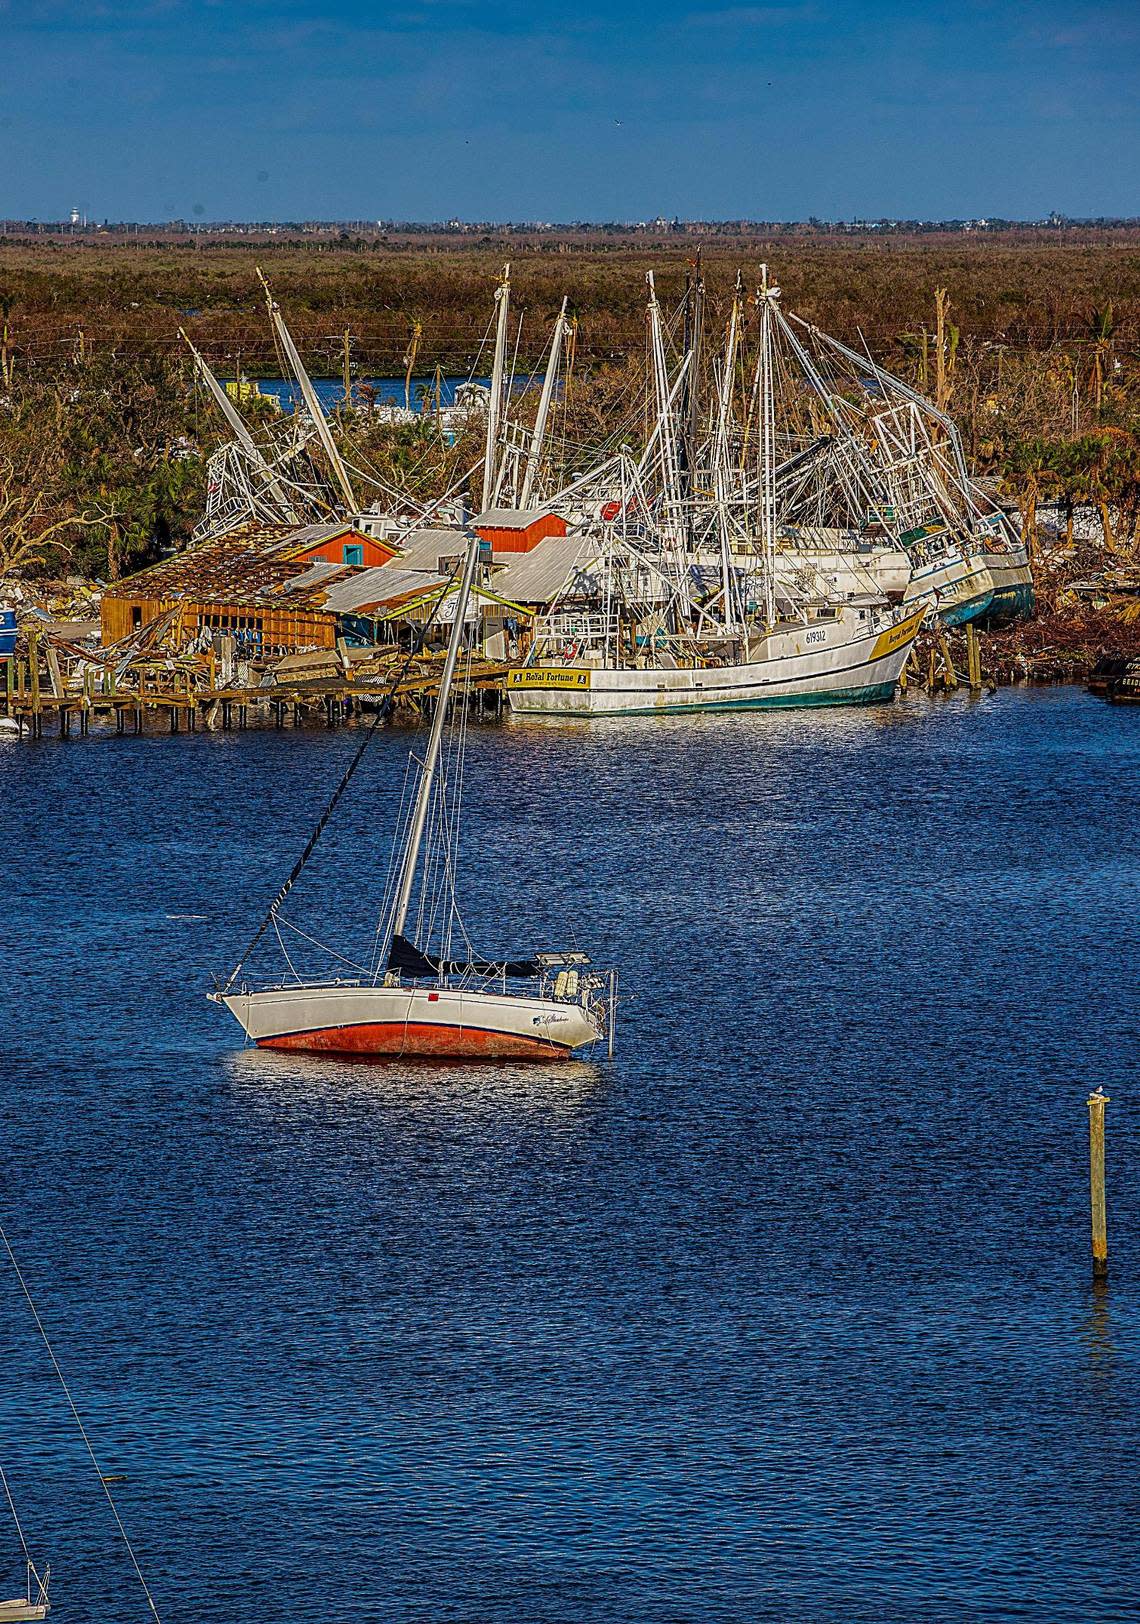 A sailboat lists to its side in Matanzas Harbor in Fort Myers Beach in front of a mass of wrecked shrimping boats Wednesday, Oct. 26, 2022. The damage was caused by Hurricane Ian, with hit the area as a Category 4 storm Wednesday, Sept. 28, 2022.